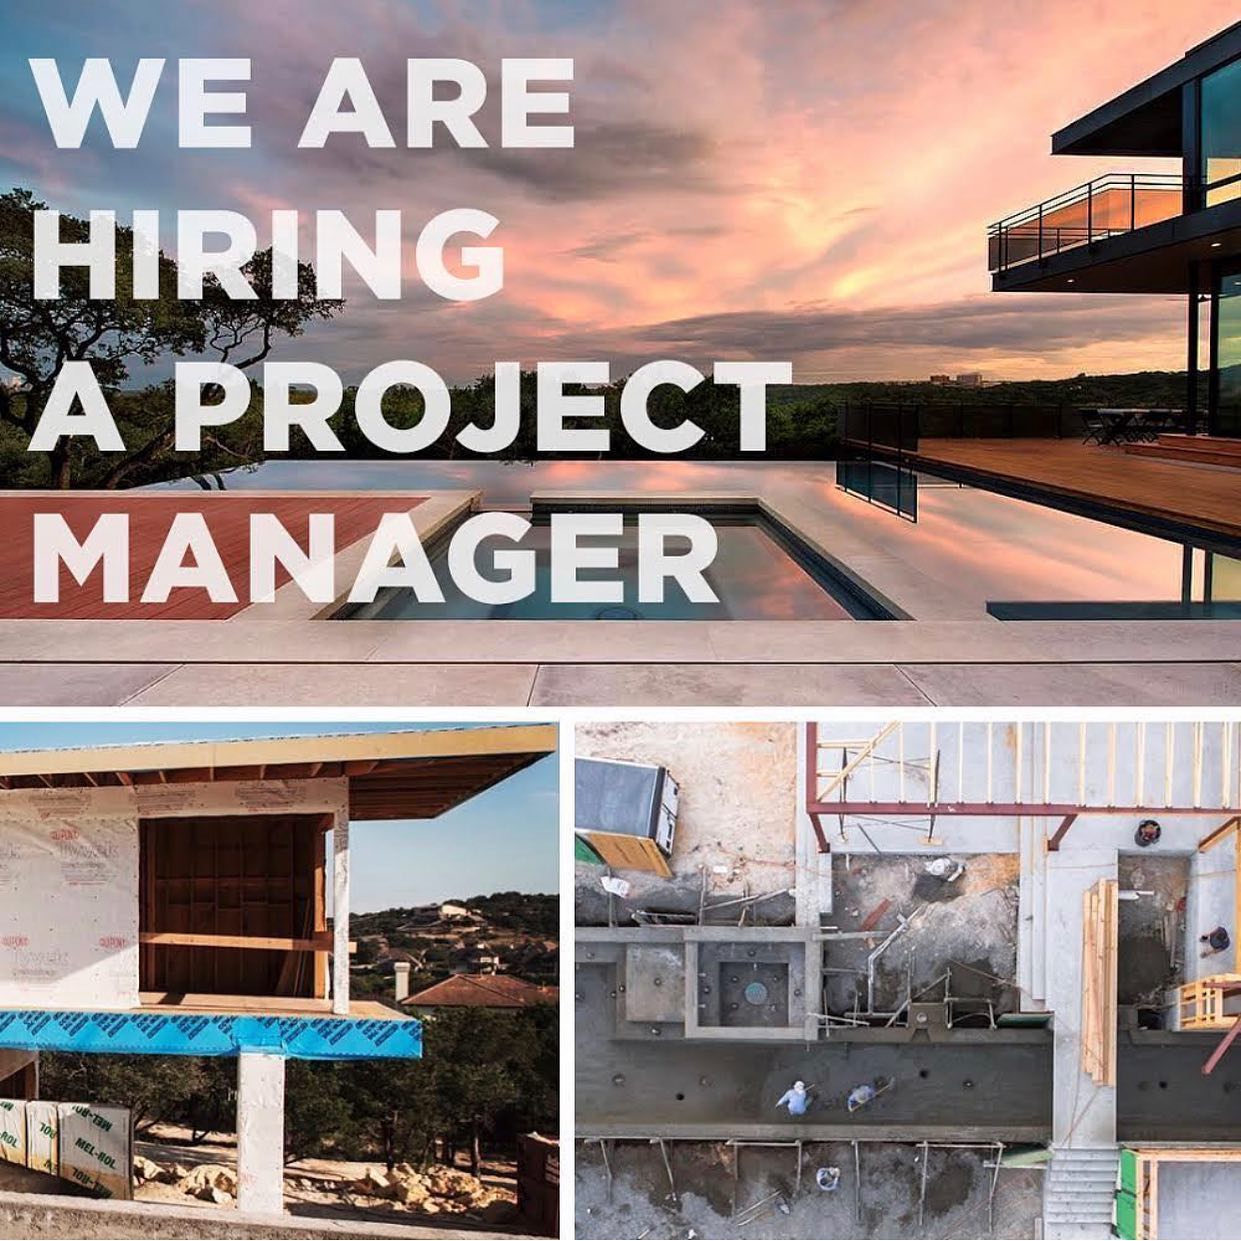 If you’re a seasoned Project Manager or Superintendent then please give us a call. We have incredible projects to build and are looking for those who what to be a part of a team of professionals.